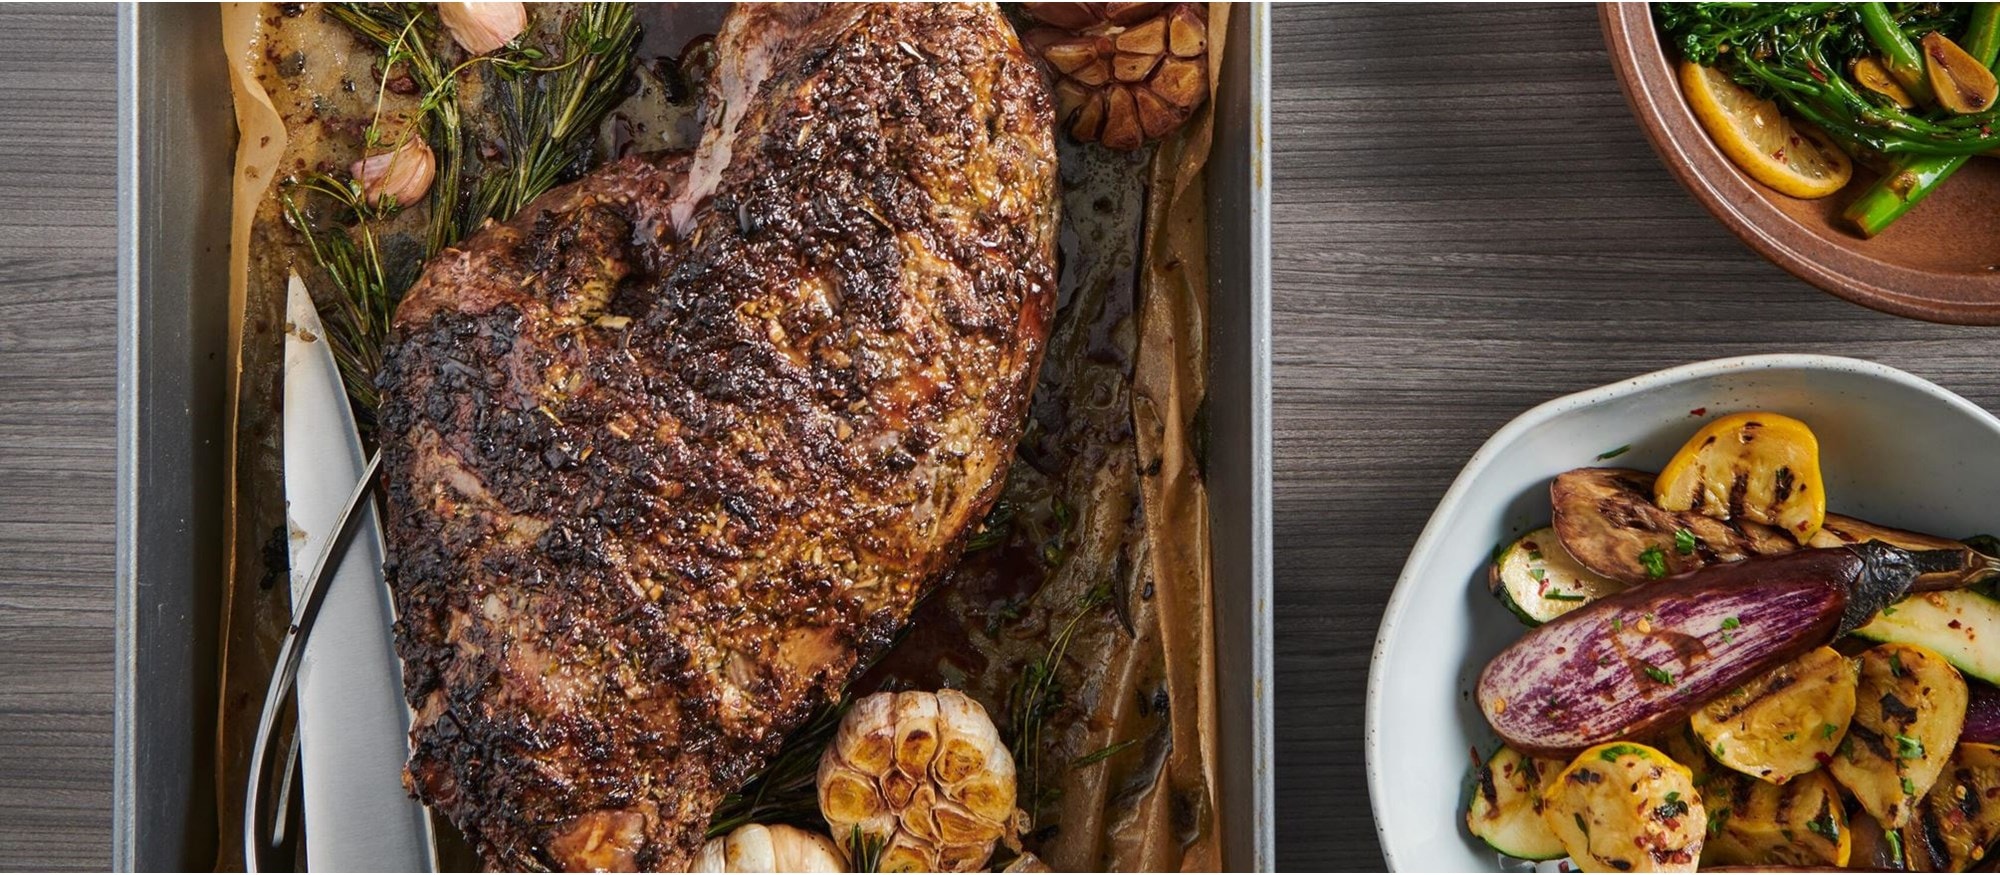 Easy and delicious Roasted Leg of Lamb recipe using the Roast Mode setting of your Wolf Oven